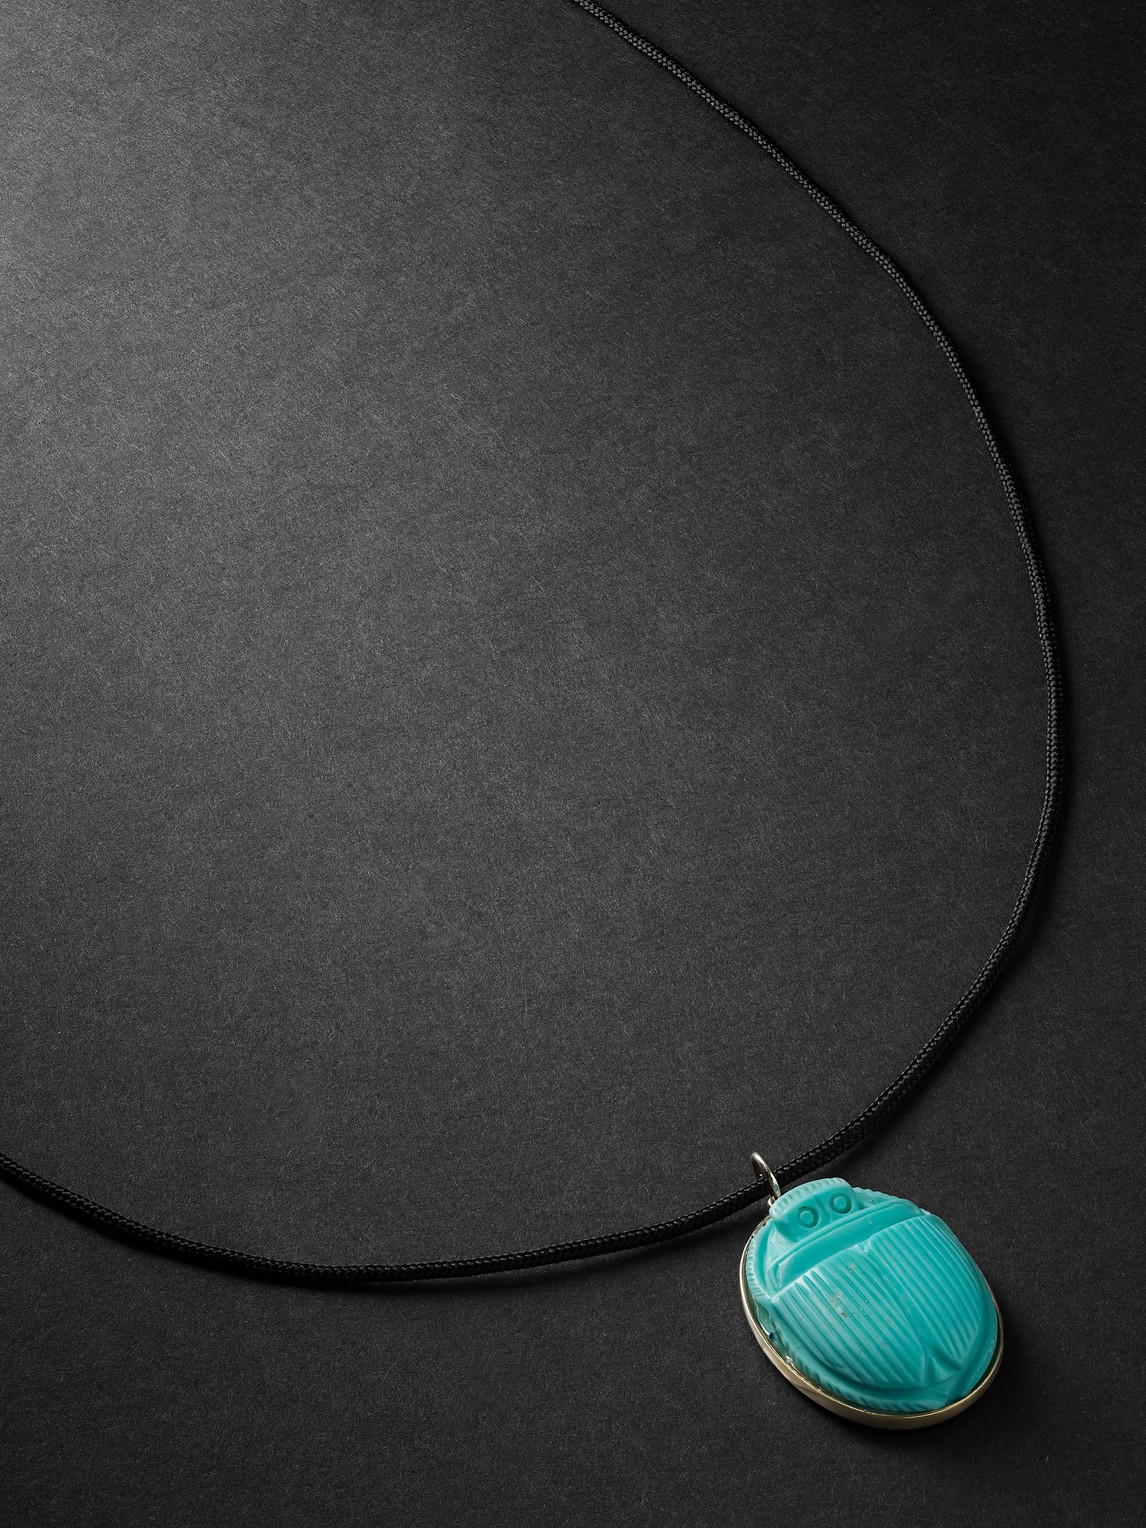 Gold, Turquoise and Cord Necklace